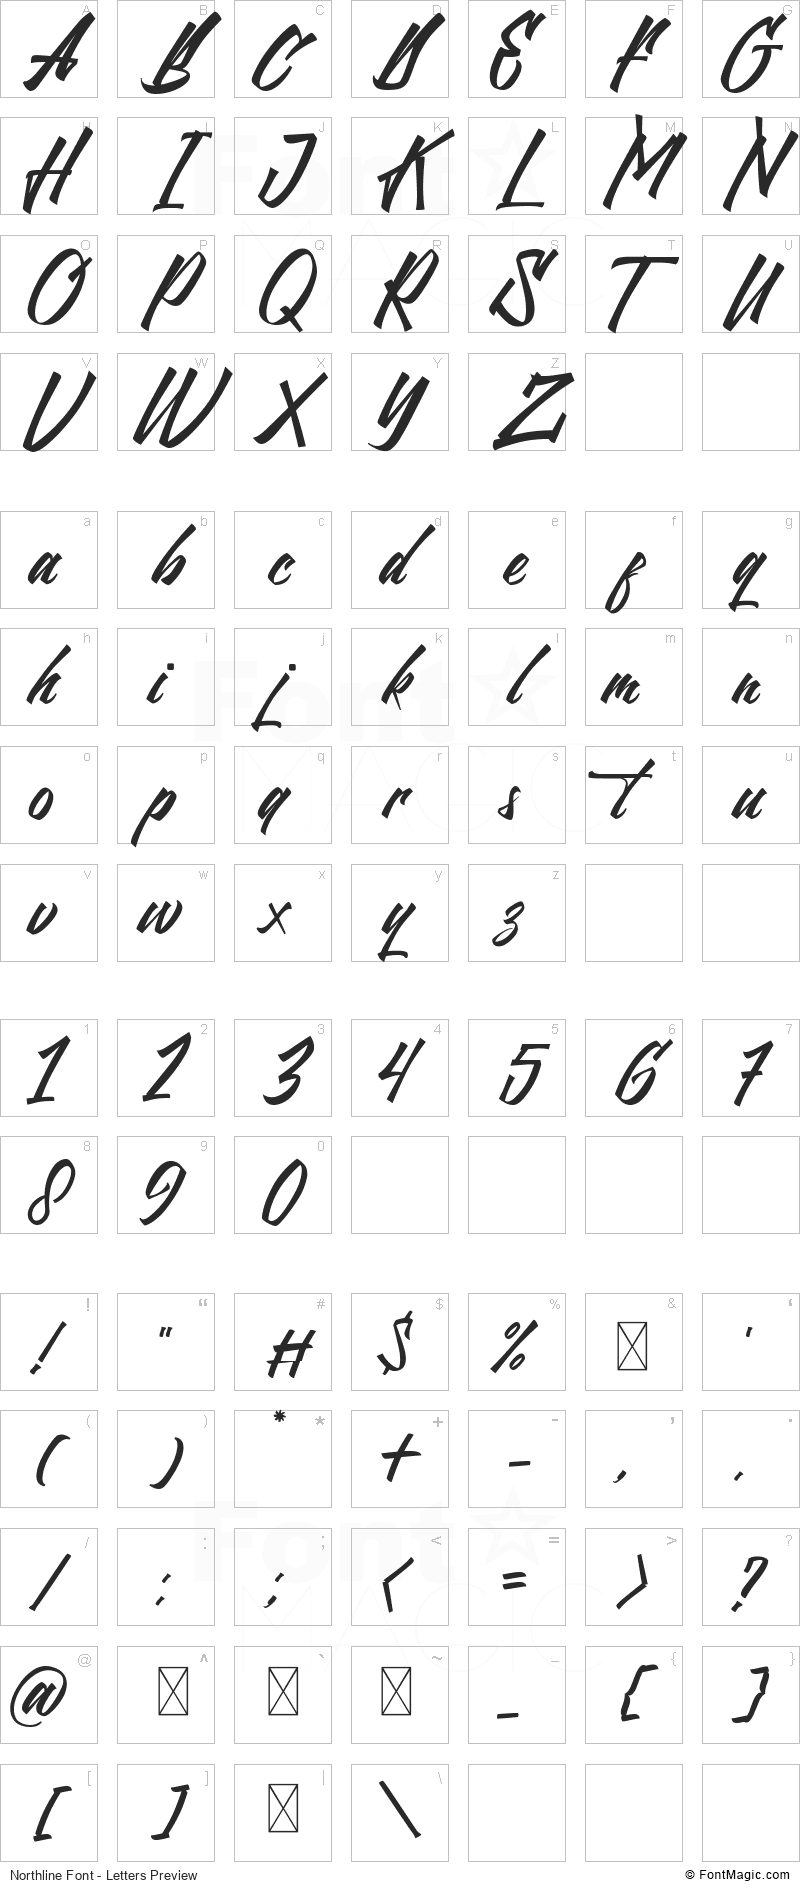 Northline Font - All Latters Preview Chart